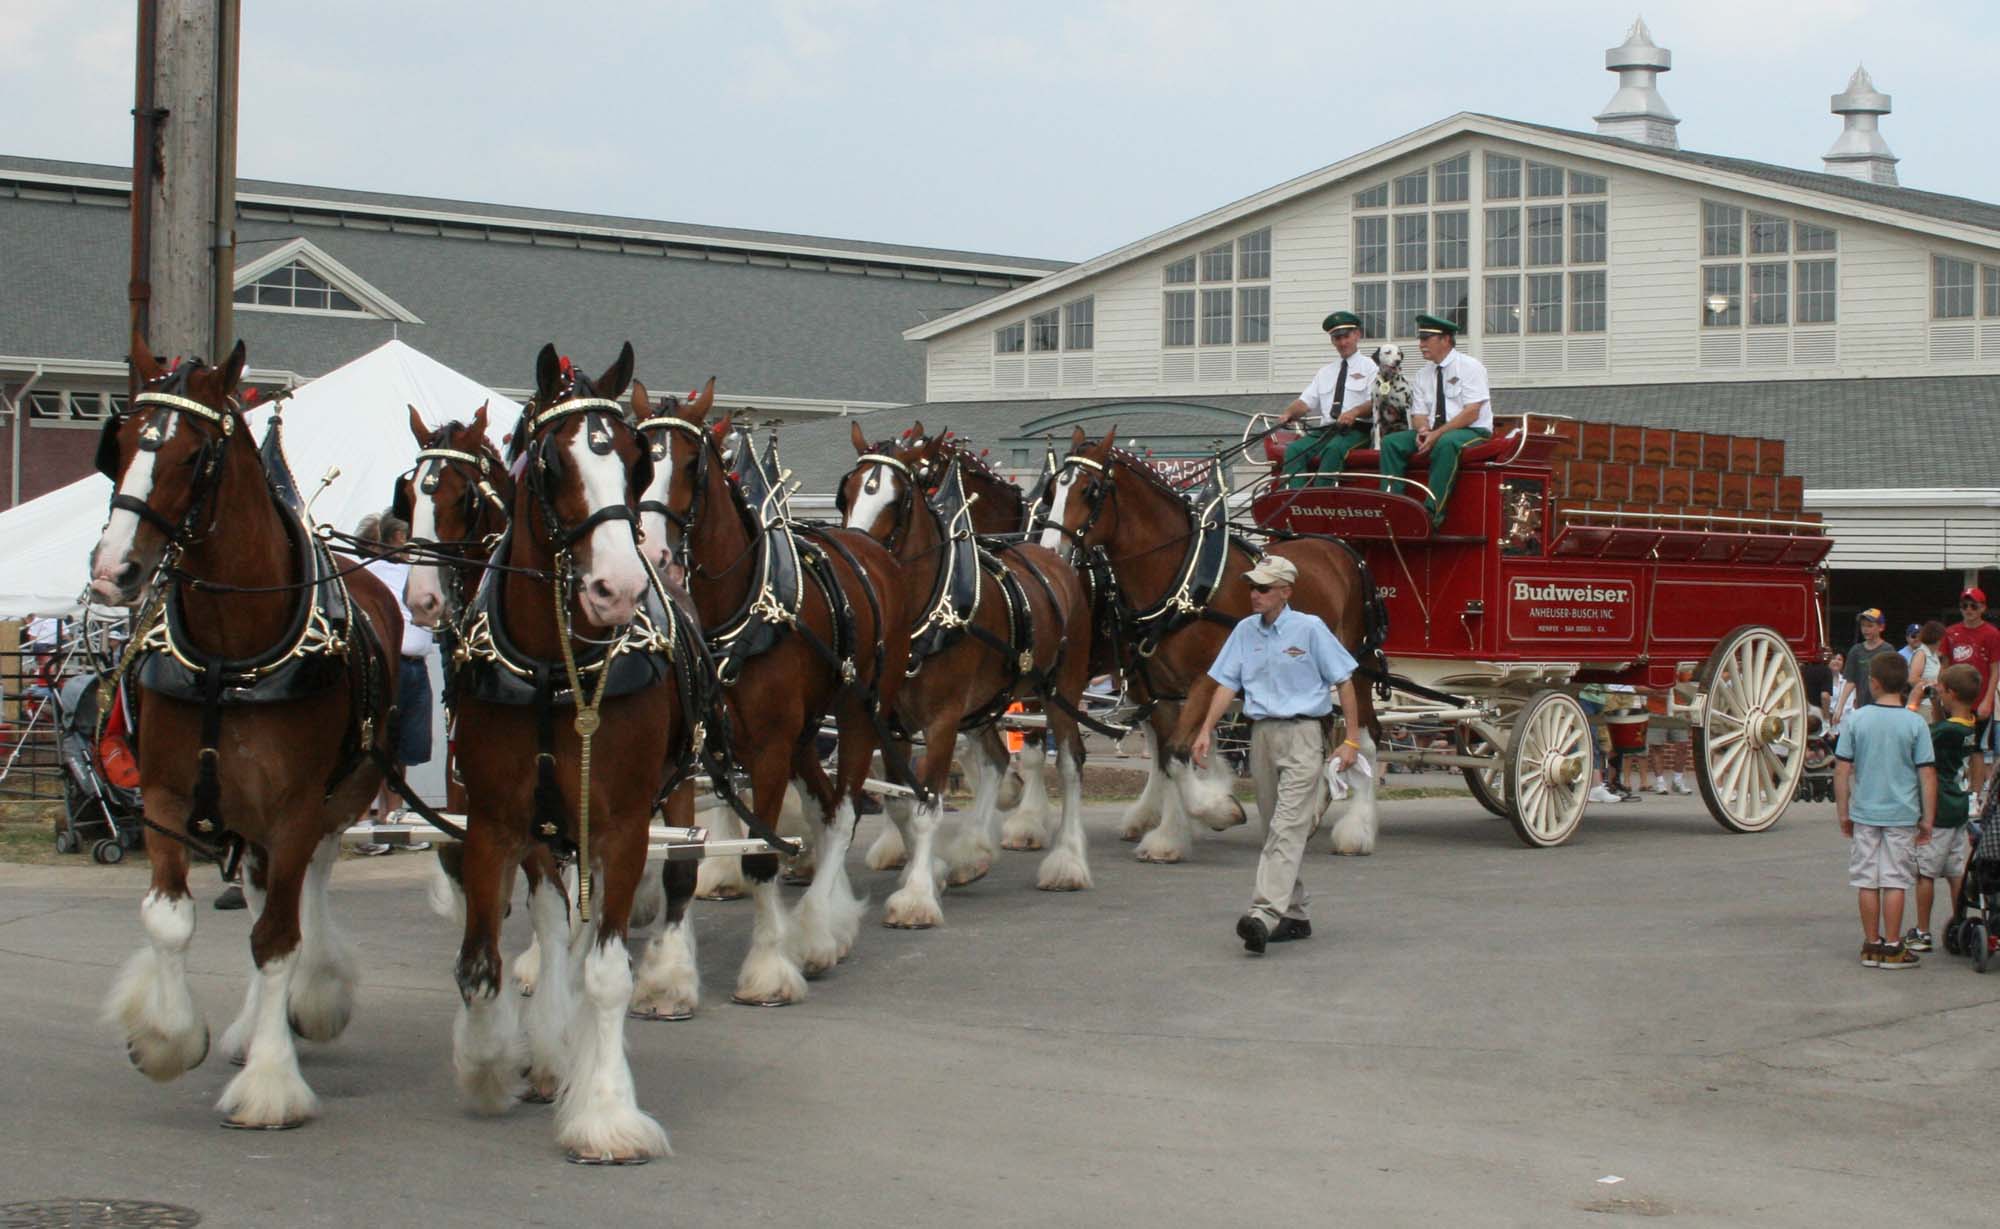 Budweiser Clydesdales Arrive In Newark At 2:00 P.M., Come On Down ...